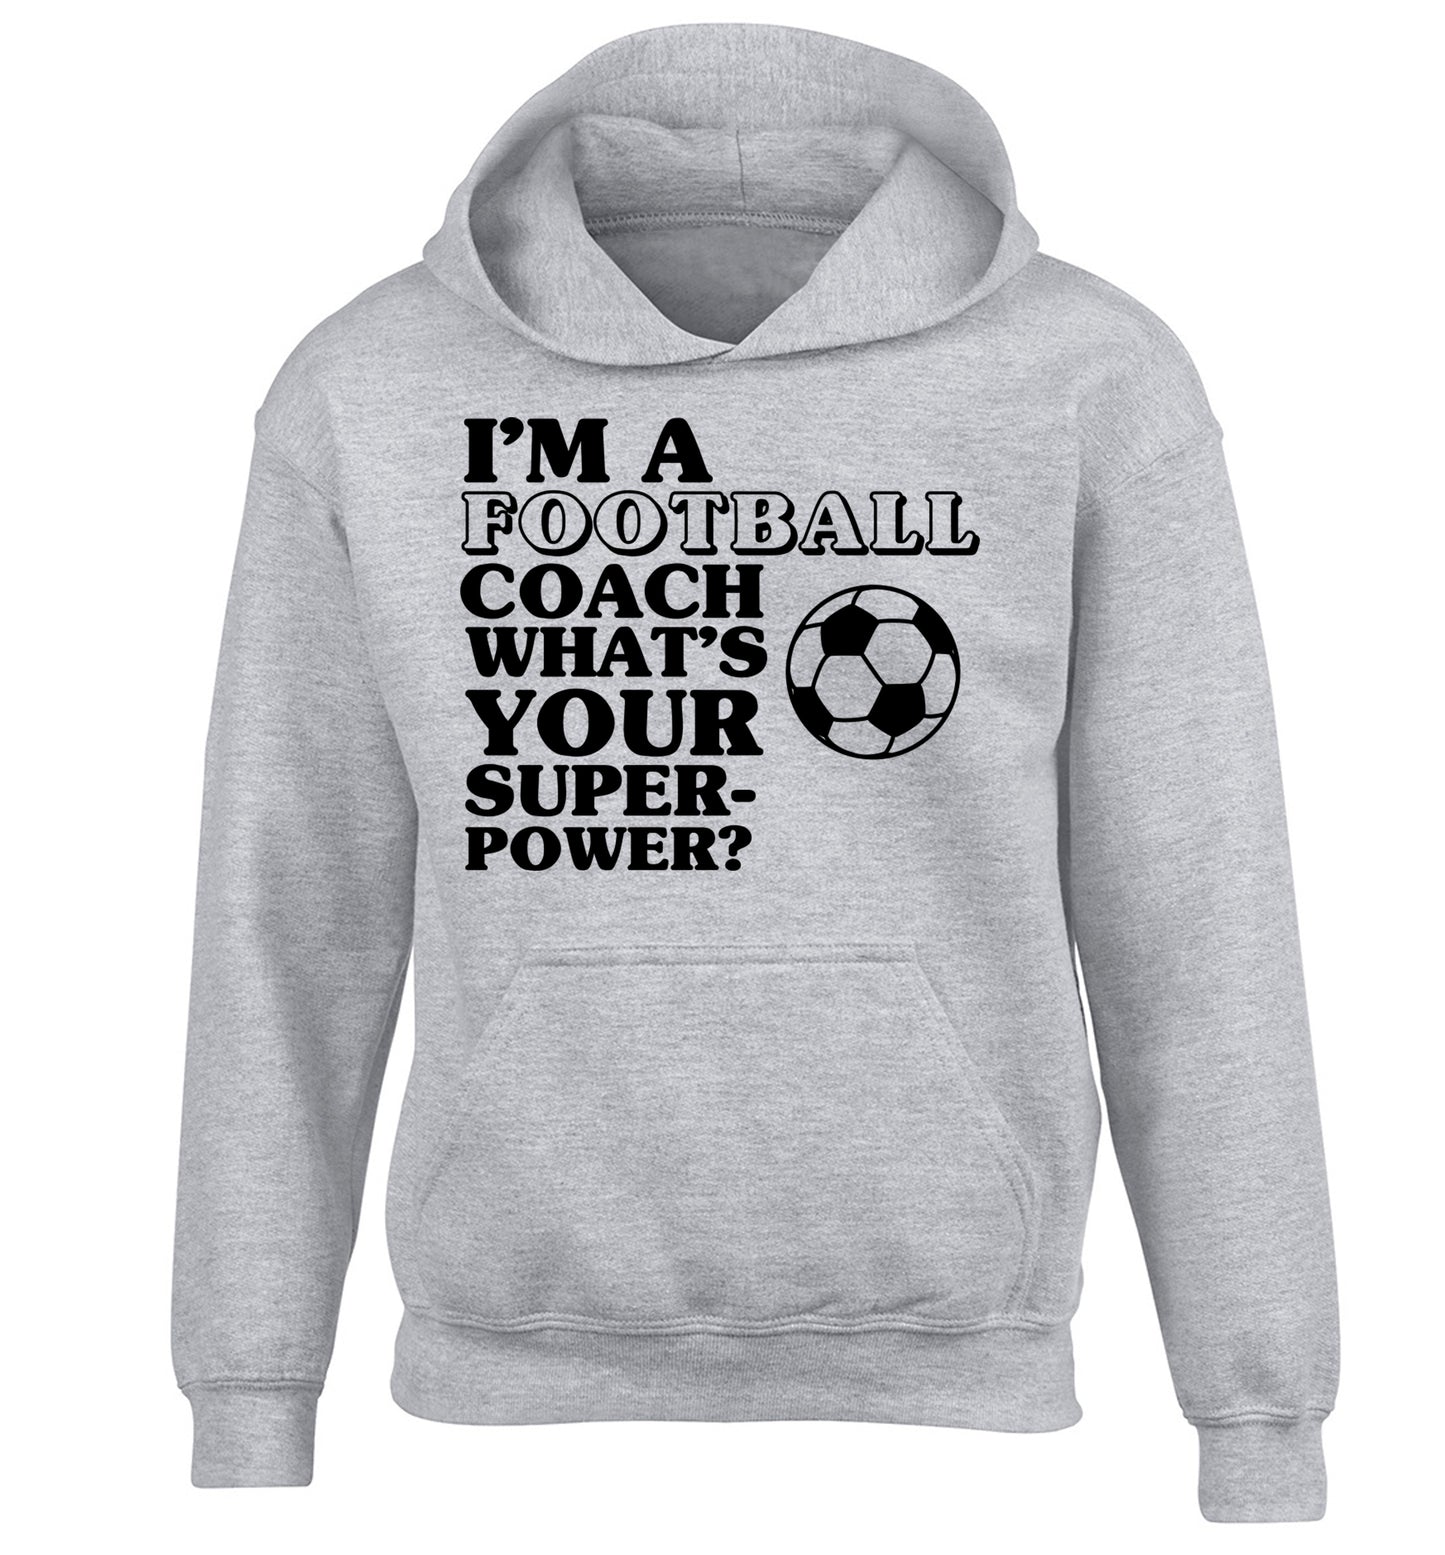 I'm a football coach what's your superpower? children's grey hoodie 12-14 Years